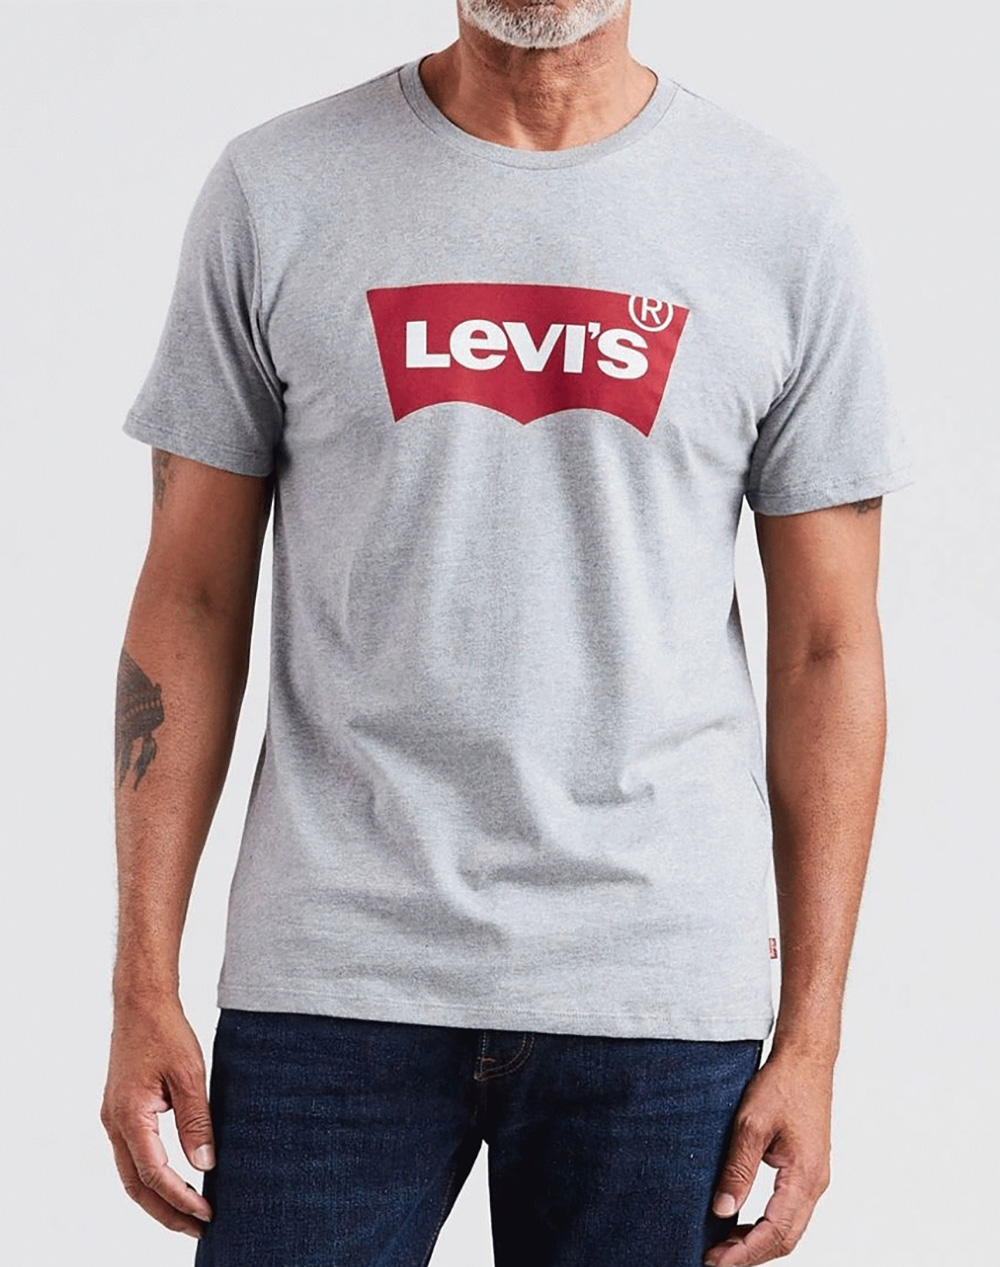 LEVIS T-SHIRT GRAPHIC SET-IN NECK 17783-0138-0138 LightGray